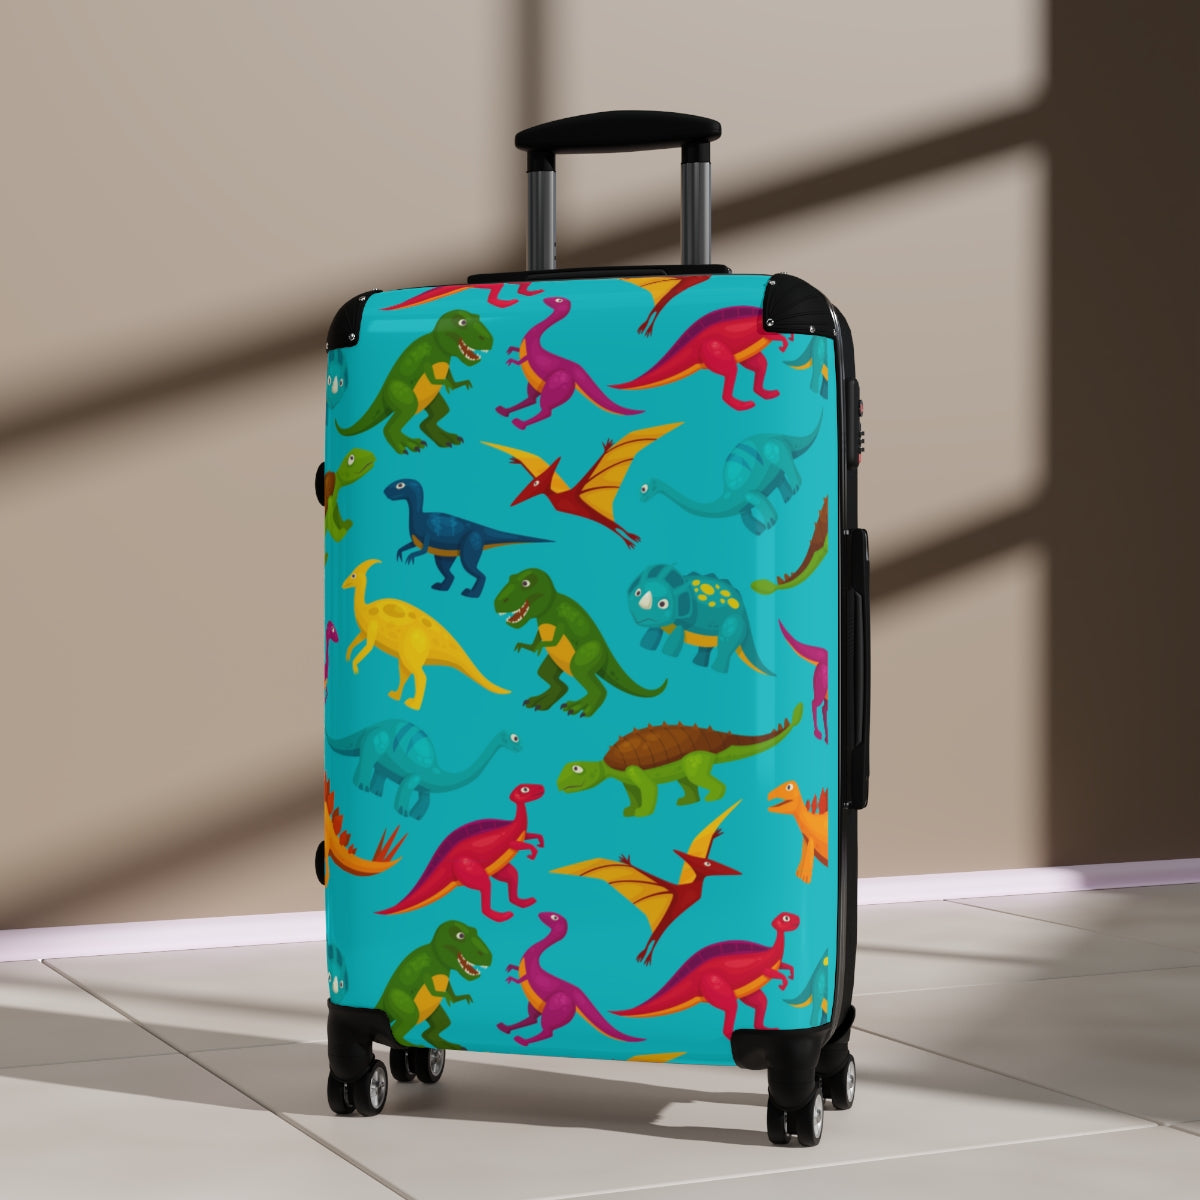 KIDS CARRY-ON Suitcases, Dinosaur Boys Cabin Suitcases, Kids Luggage With Wheels, Spinner, Combination Lock | Artzira